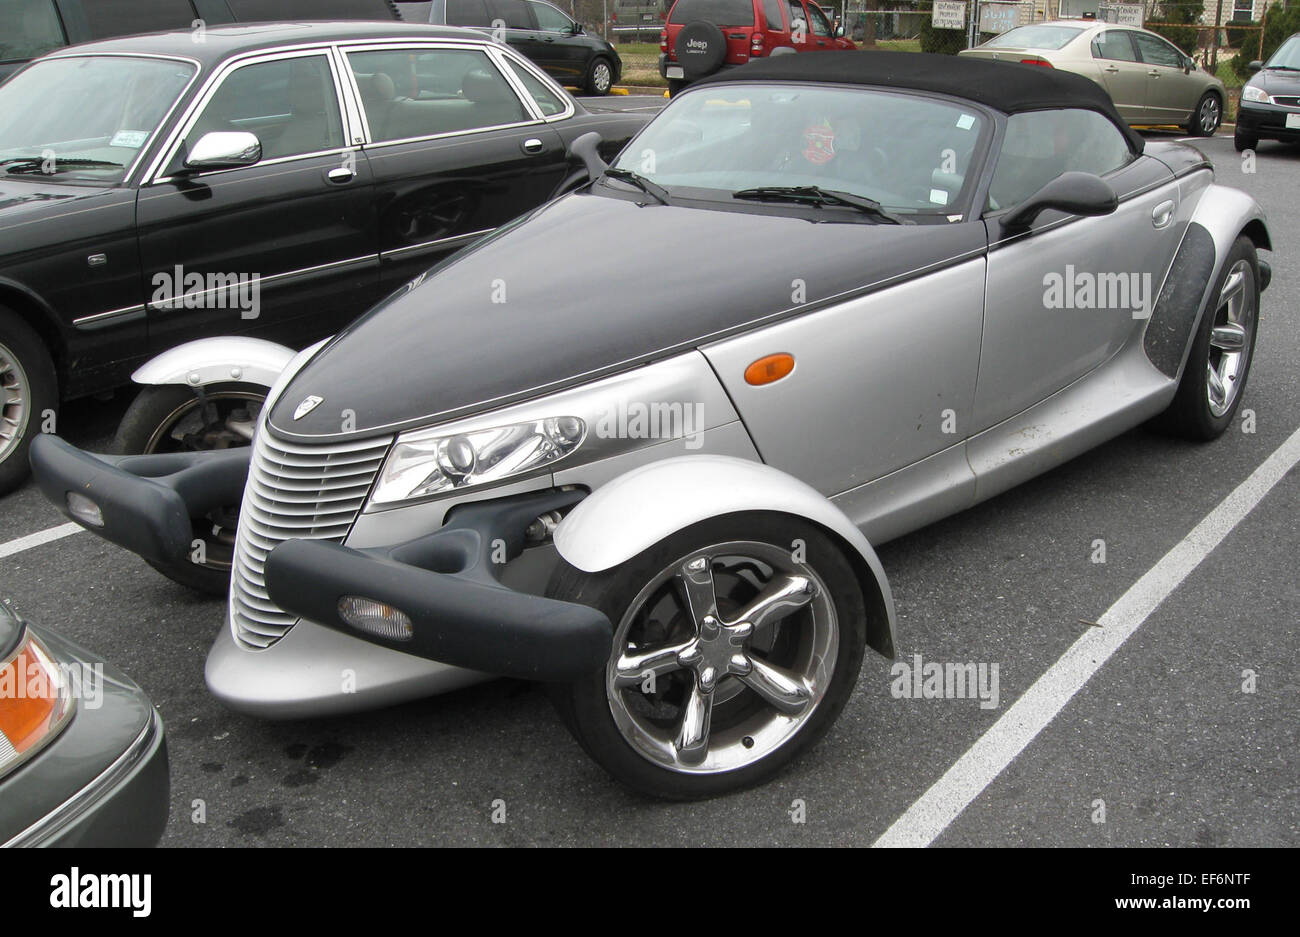 Plymouth Prowler 2 11 28 2009 Stock Photo